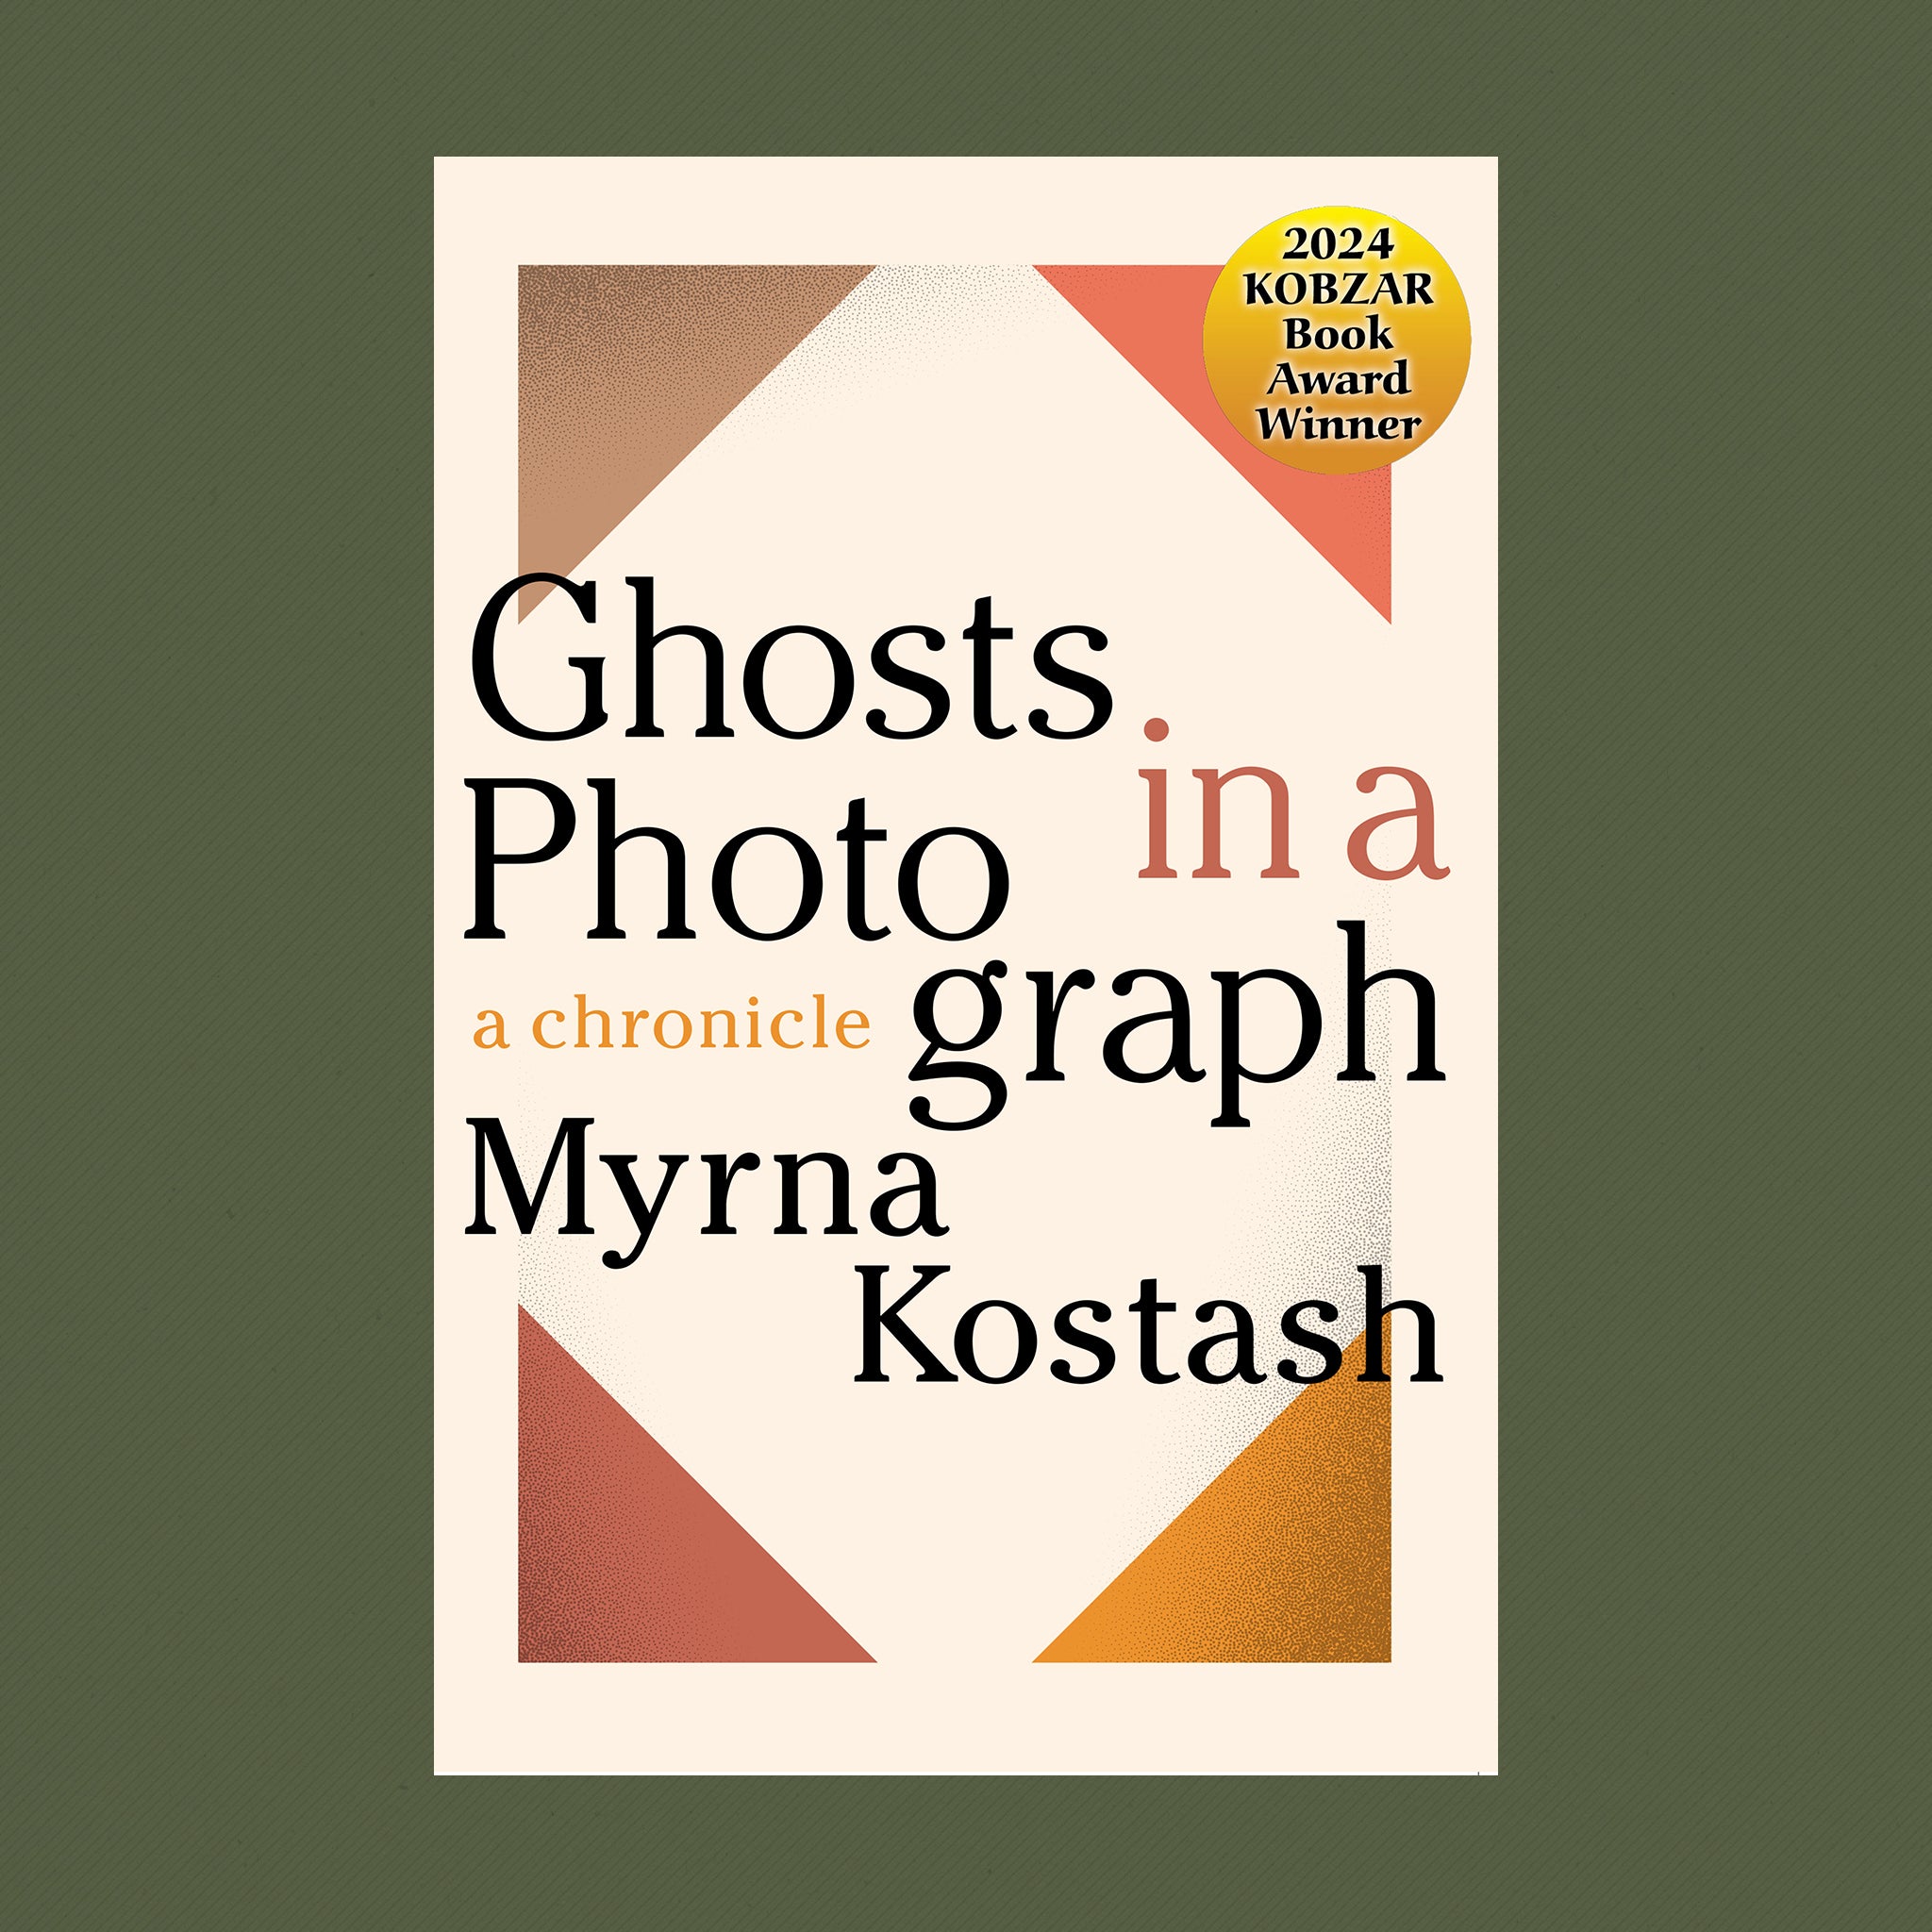 Book Cover: Ghosts in a Photograph: A Chronicle  by Myrna Kostash. Winner of the 2024 Kobzar Book Award. Title sits on a beige background with multicoloured corners, designed to mimic a vintage photo album.